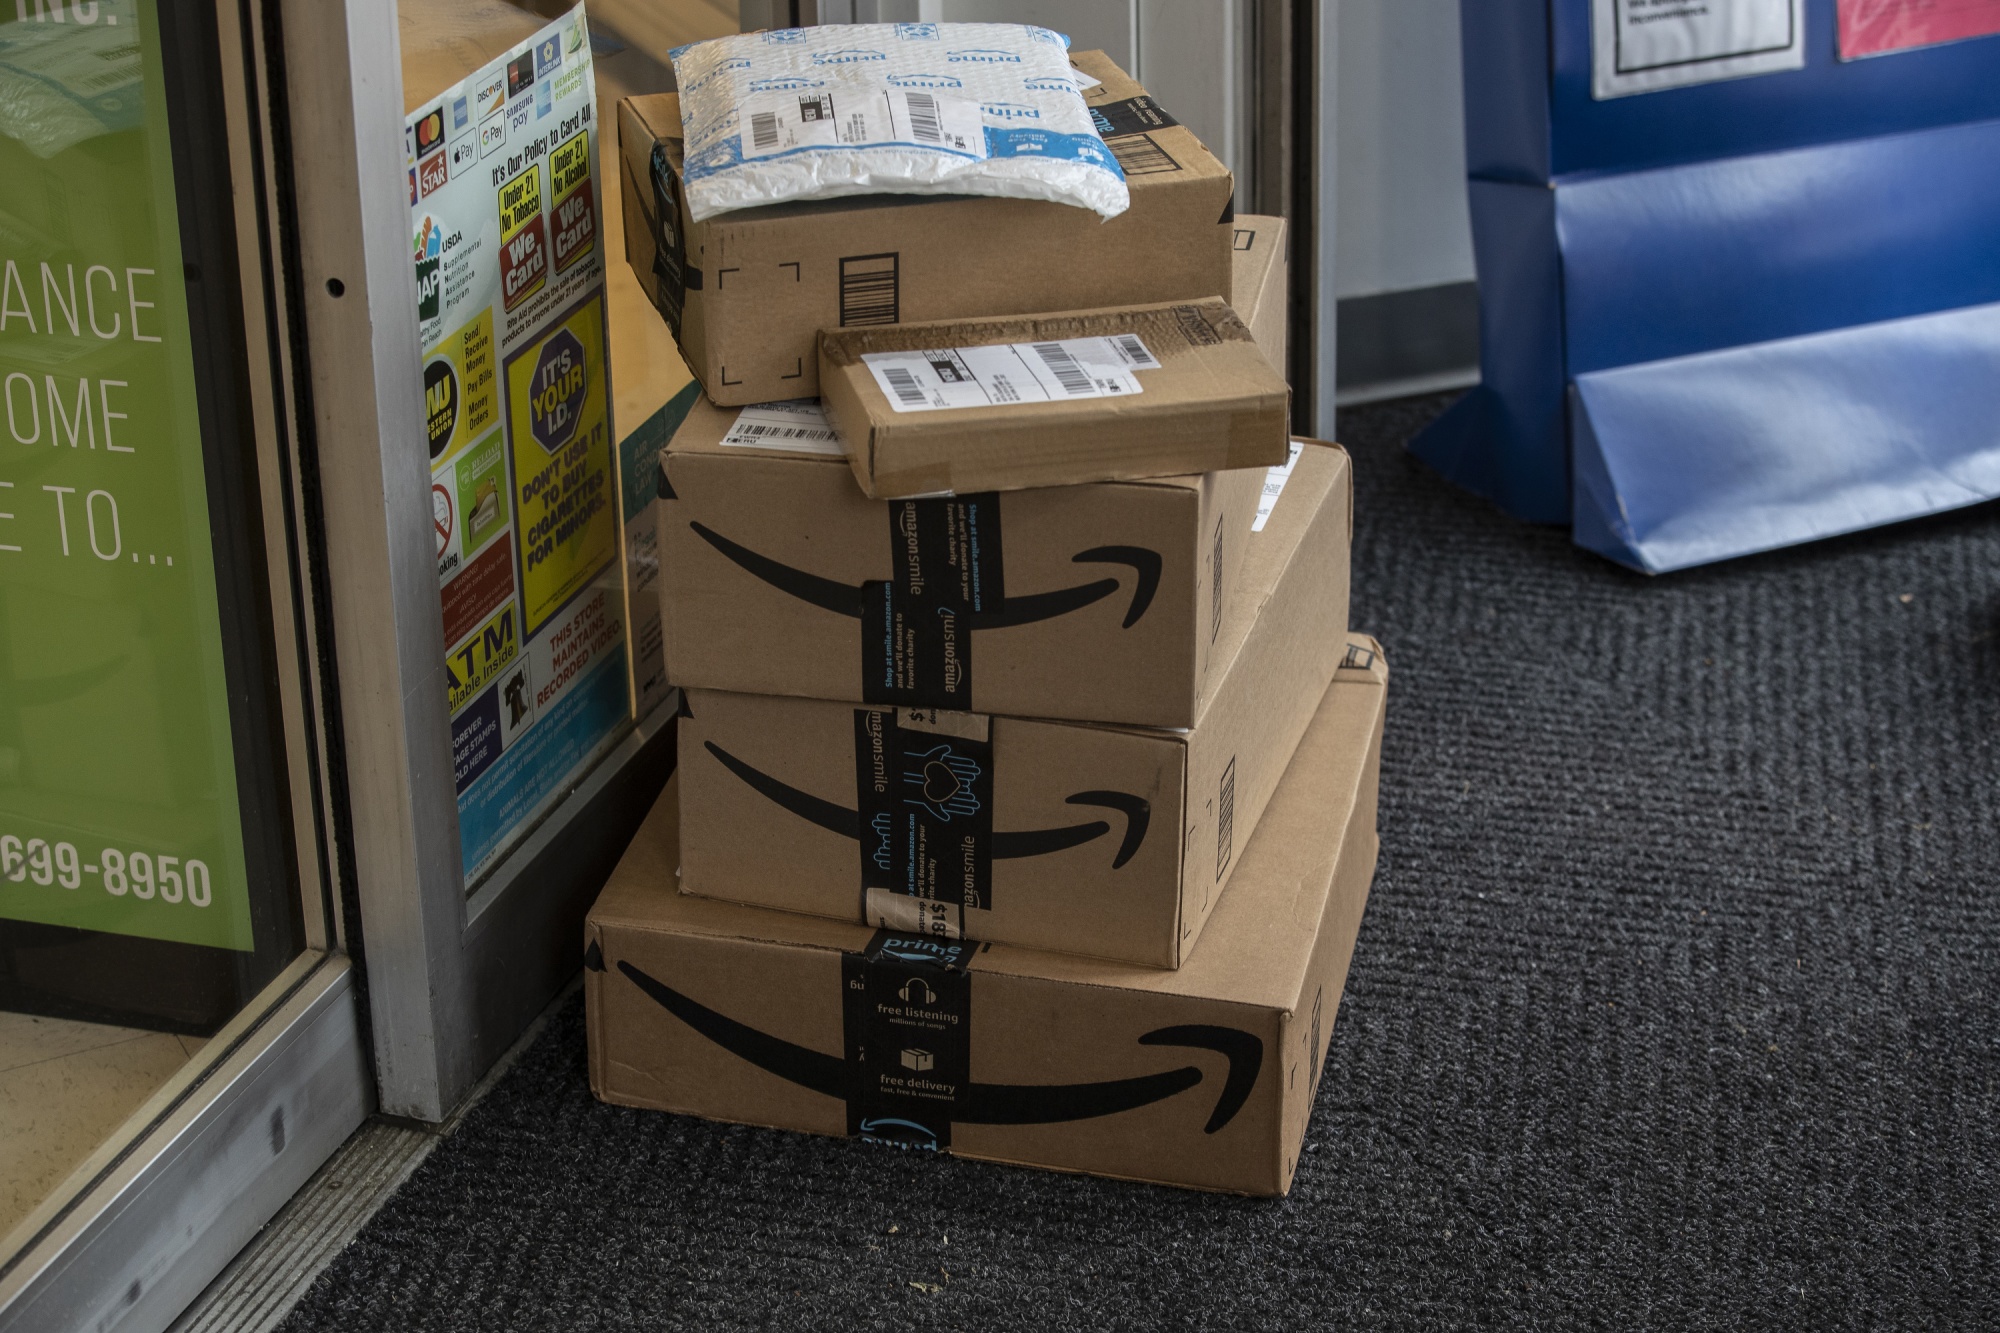 Recyclable packaging from vendors like Amazon Inc. can’t be collected quickly enough, which is pushing up costs.